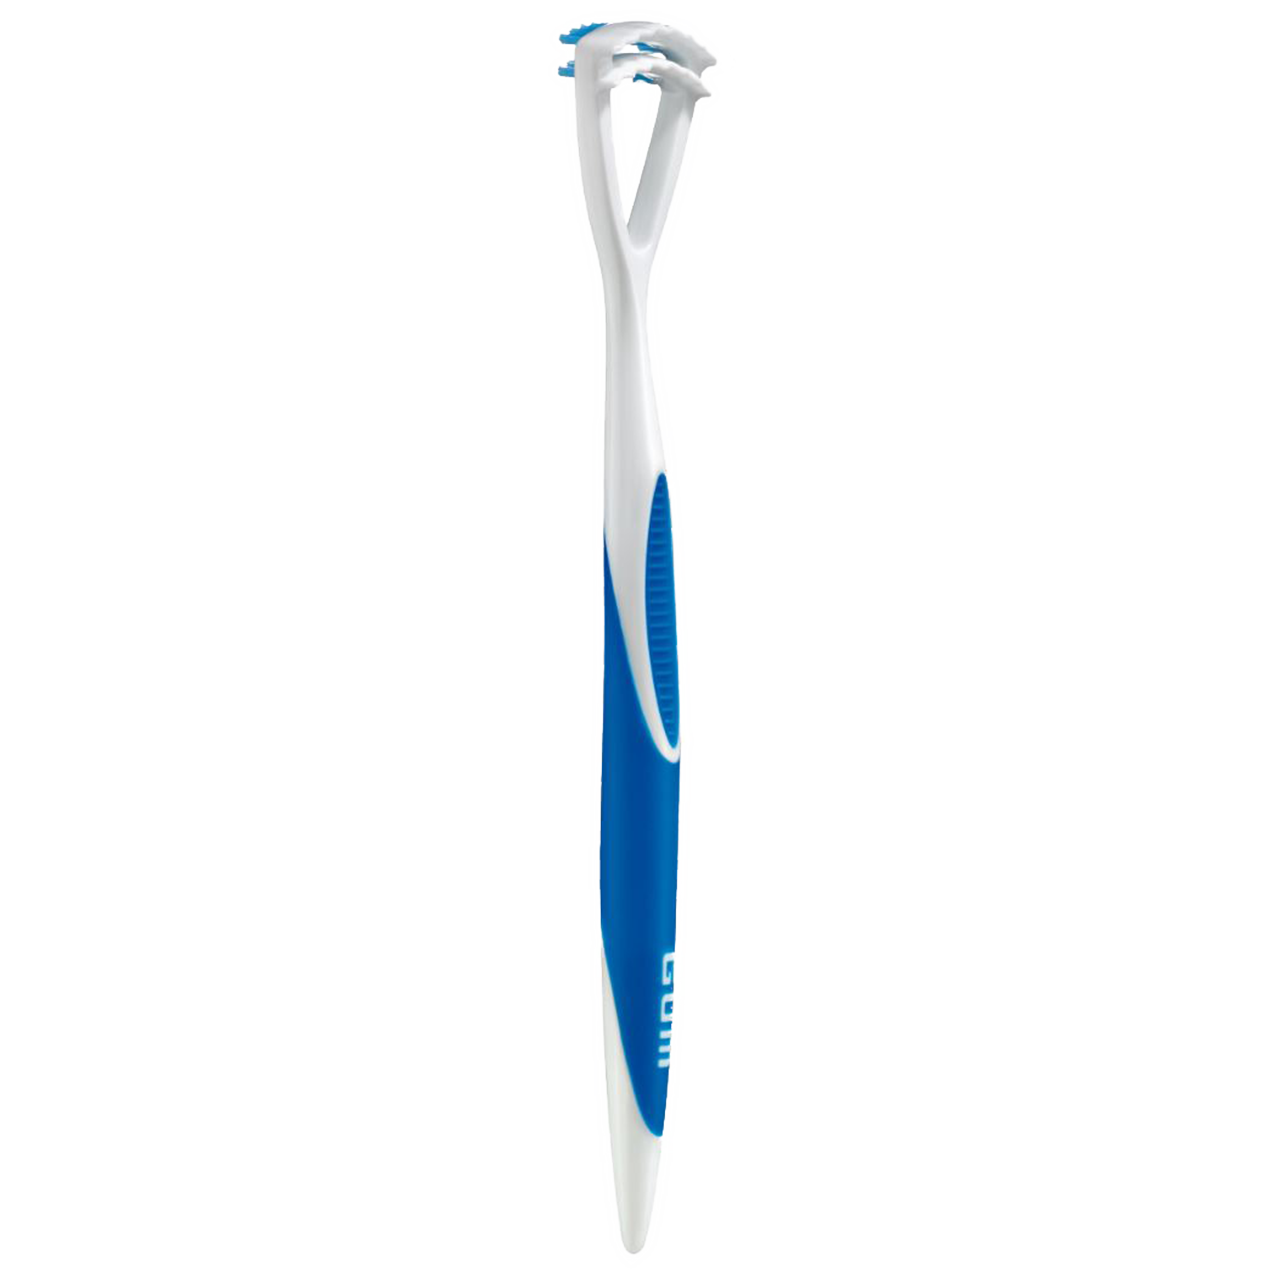 GUM HaliControl Tongue Cleaner | Removes Plaque And Bacteria From The Tongue